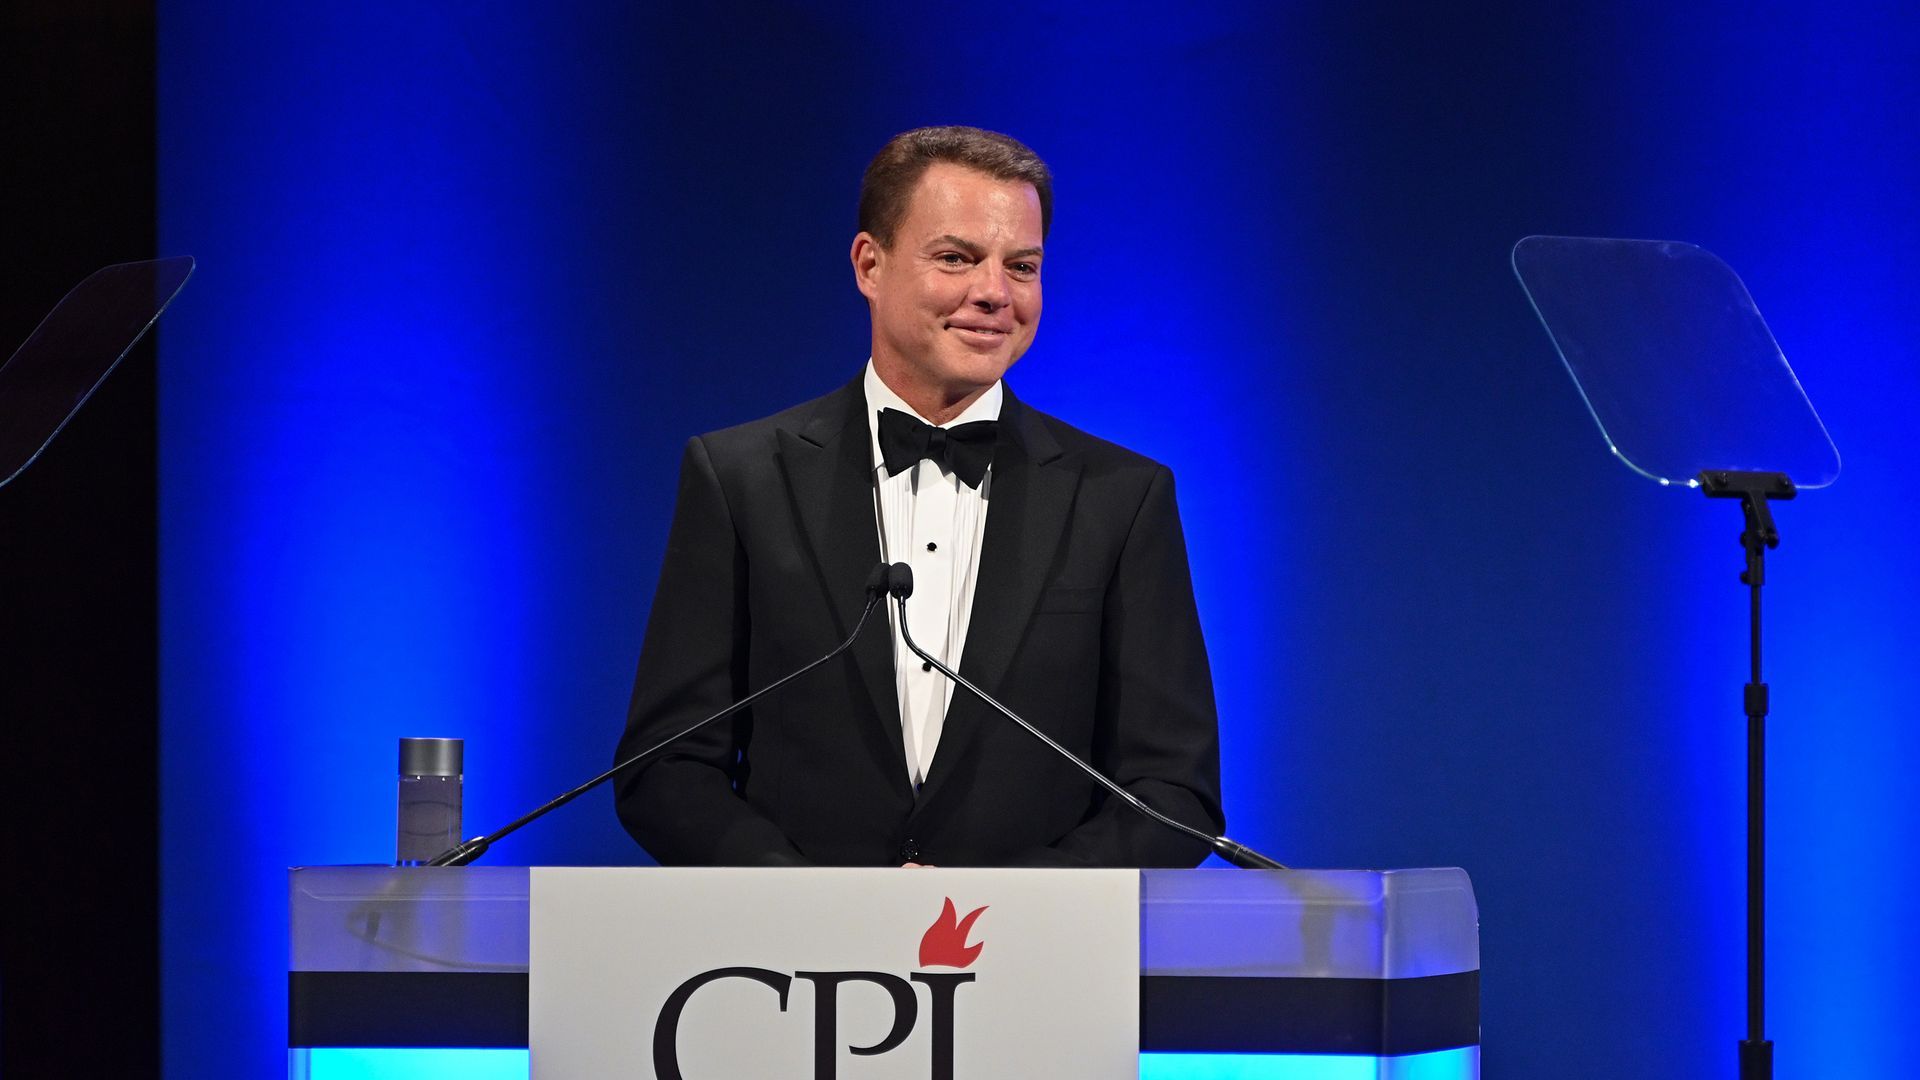 Photo of Shepard Smith smiling as he stands on stage behind a podium with the "CPJ" logo